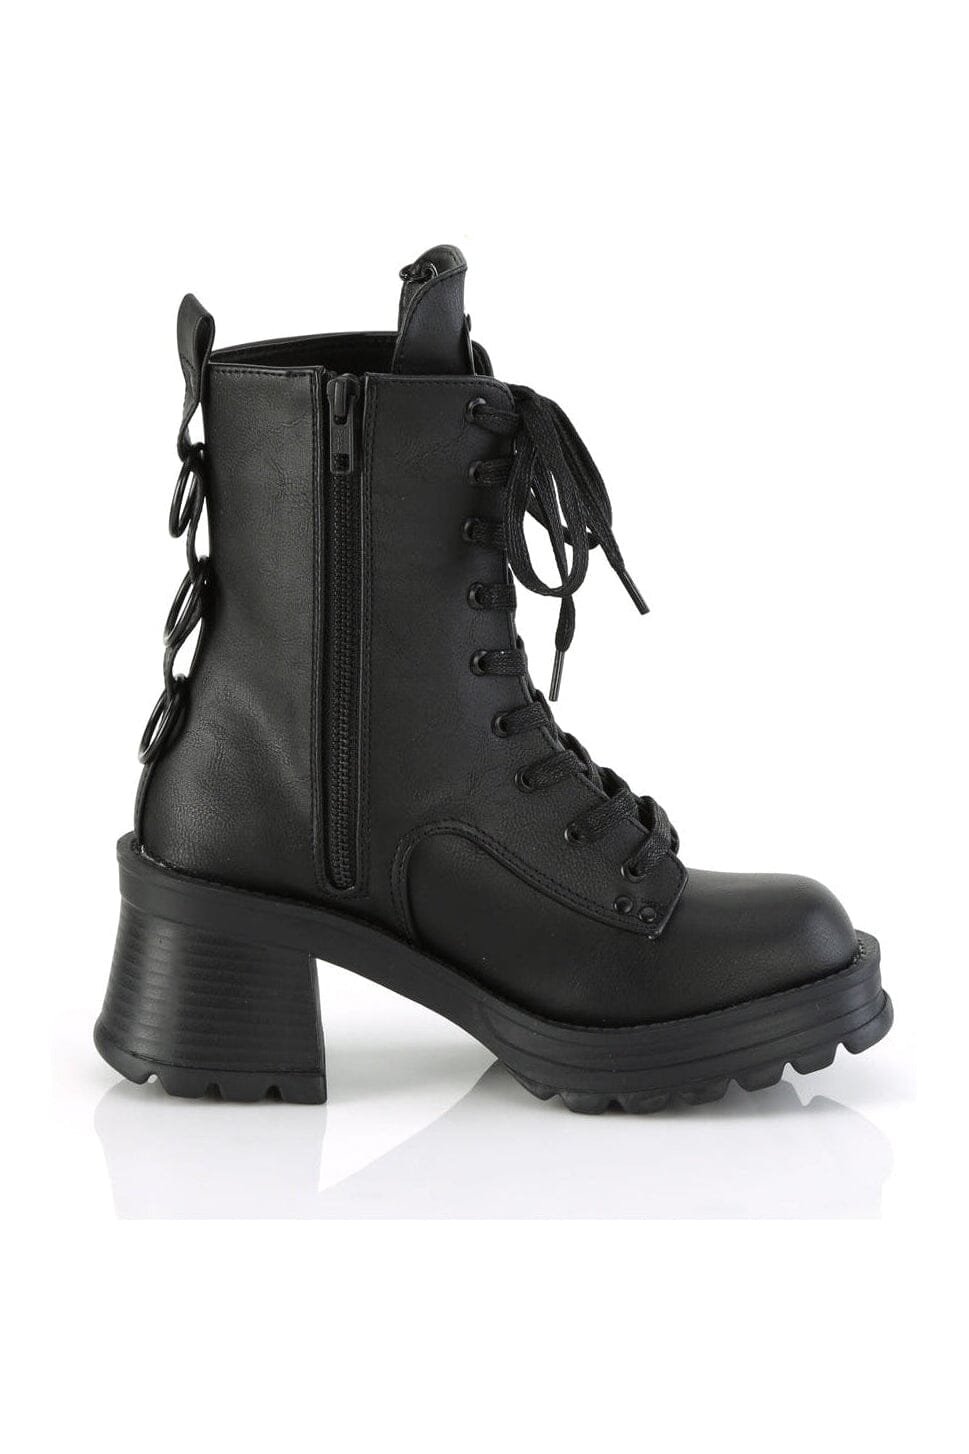 BRATTY-50 Black Vegan Leather Ankle Boot-Ankle Boots-Demonia-SEXYSHOES.COM